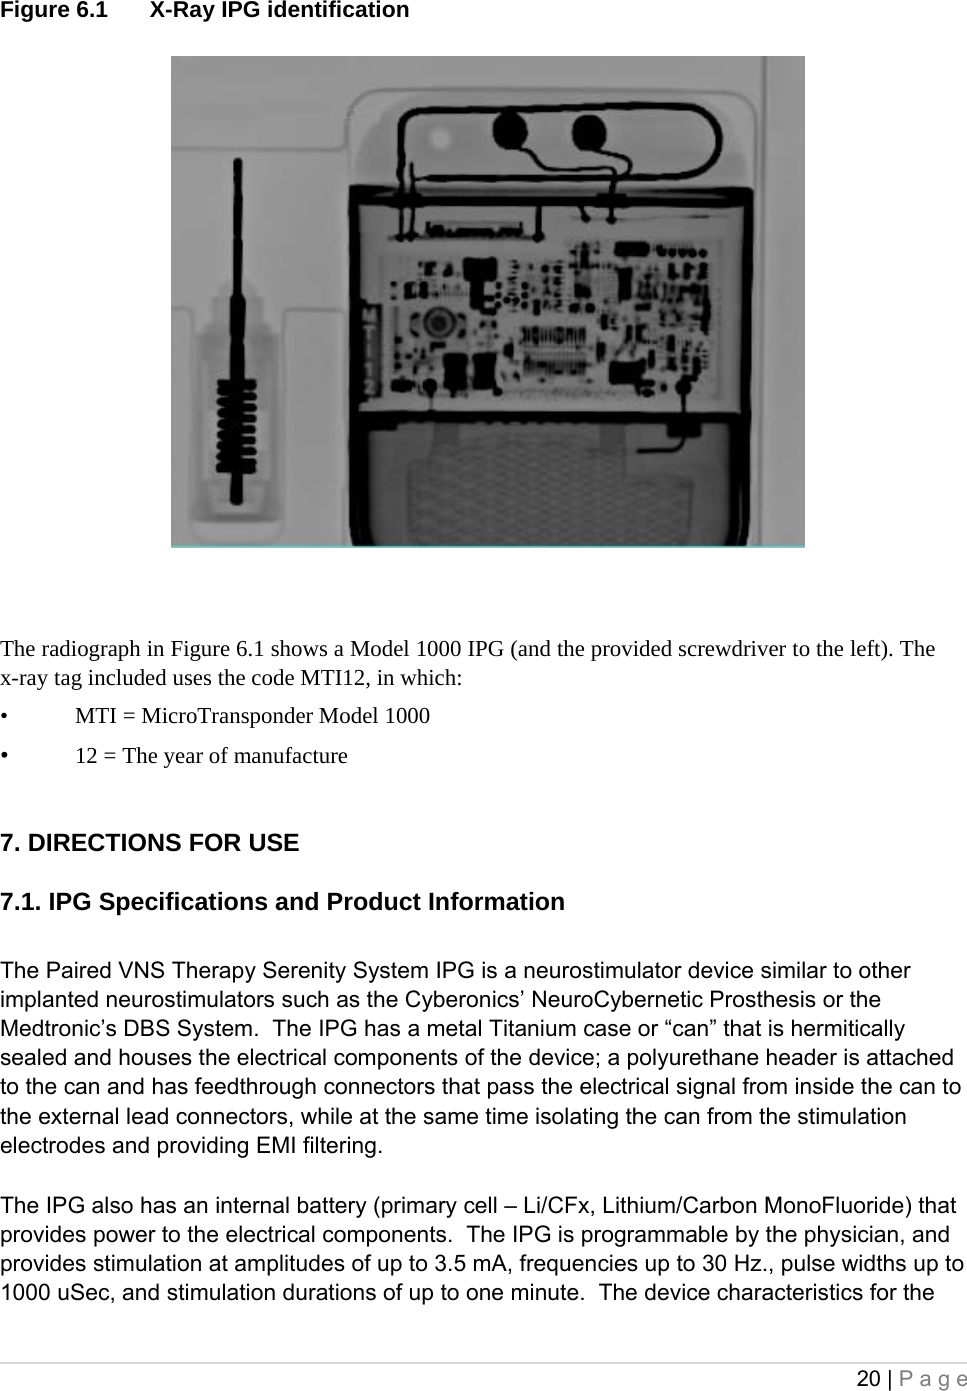 20 | Page  Figure 6.1  X-Ray IPG identification   The radiograph in Figure 6.1 shows a Model 1000 IPG (and the provided screwdriver to the left). The x-ray tag included uses the code MTI12, in which:  • MTI = MicroTransponder Model 1000  • 12 = The year of manufacture  7. DIRECTIONS FOR USE  7.1. IPG Specifications and Product Information  The Paired VNS Therapy Serenity System IPG is a neurostimulator device similar to other implanted neurostimulators such as the Cyberonics’ NeuroCybernetic Prosthesis or the Medtronic’s DBS System.  The IPG has a metal Titanium case or “can” that is hermitically sealed and houses the electrical components of the device; a polyurethane header is attached to the can and has feedthrough connectors that pass the electrical signal from inside the can to the external lead connectors, while at the same time isolating the can from the stimulation electrodes and providing EMI filtering.   The IPG also has an internal battery (primary cell – Li/CFx, Lithium/Carbon MonoFluoride) that provides power to the electrical components.  The IPG is programmable by the physician, and provides stimulation at amplitudes of up to 3.5 mA, frequencies up to 30 Hz., pulse widths up to 1000 uSec, and stimulation durations of up to one minute.  The device characteristics for the 